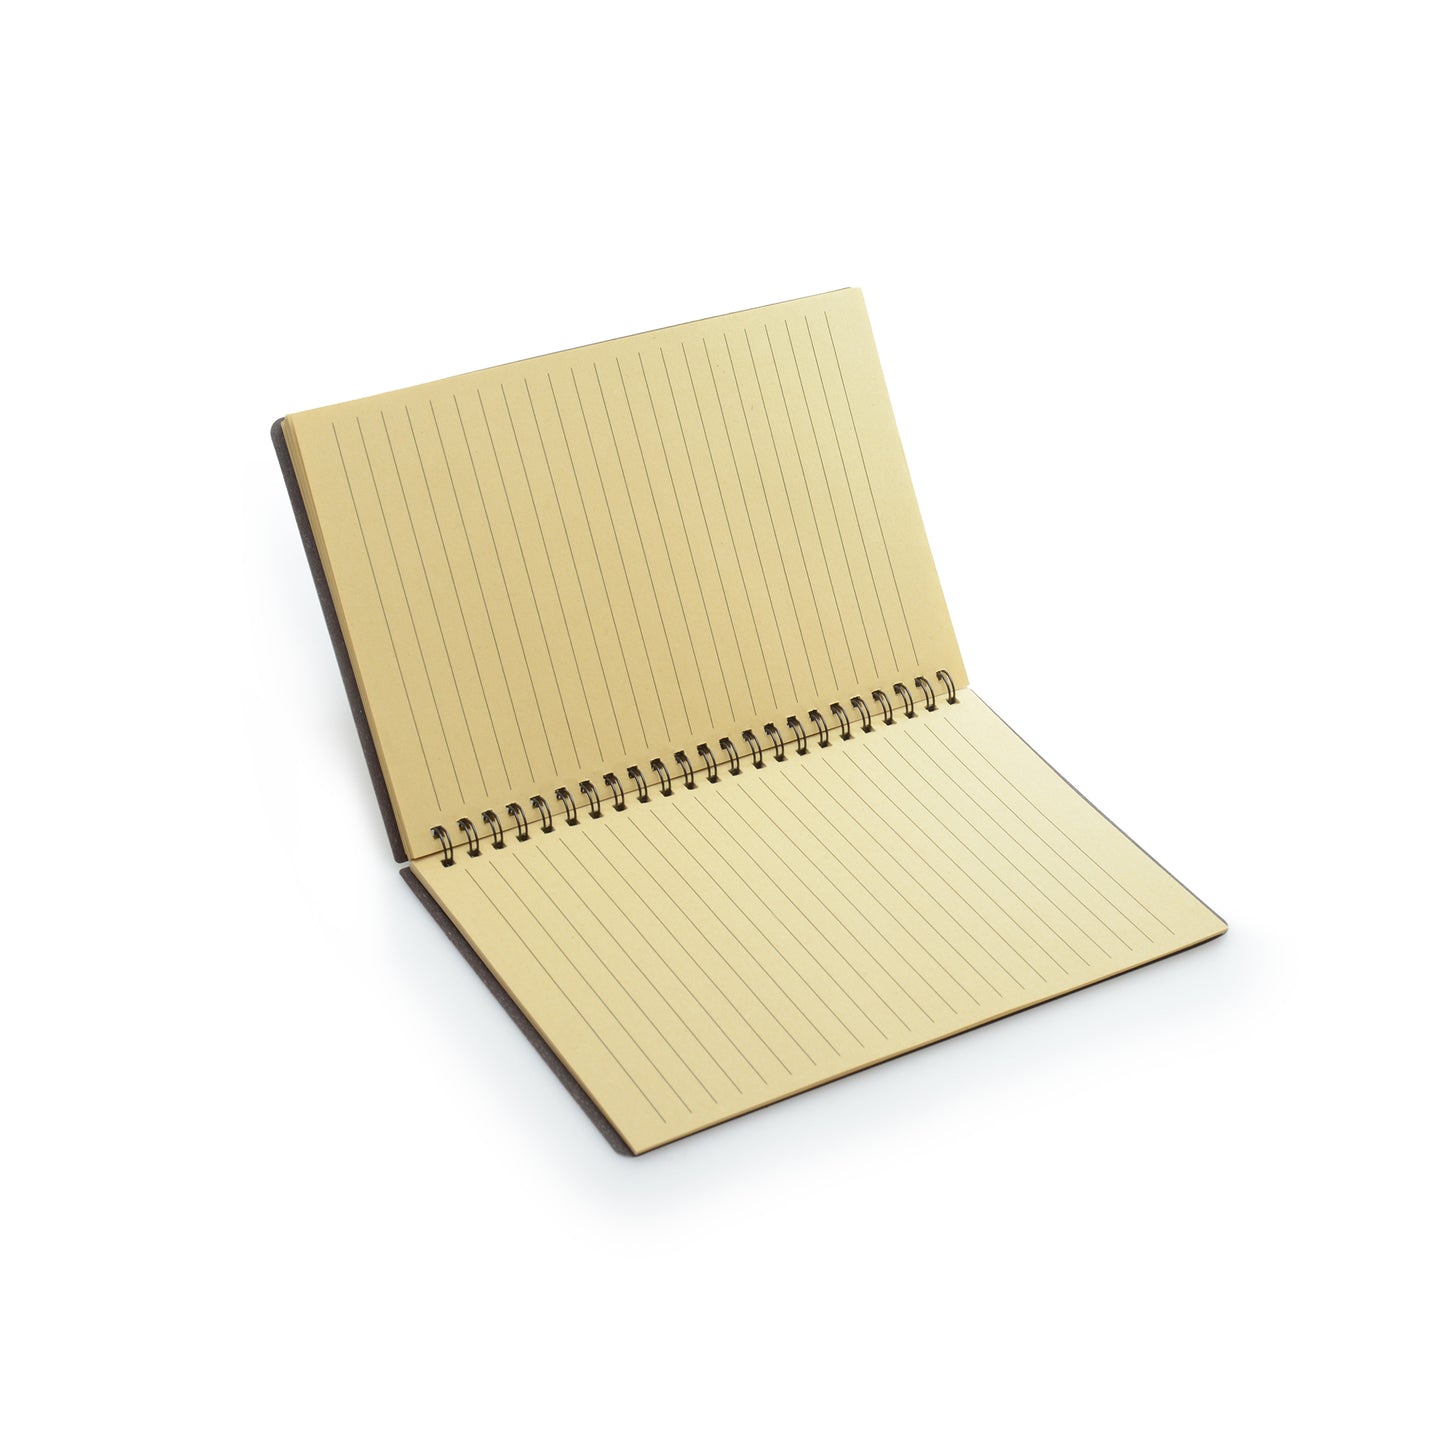 PROMOTIONAL A5 COFFEE NOTEBOOK